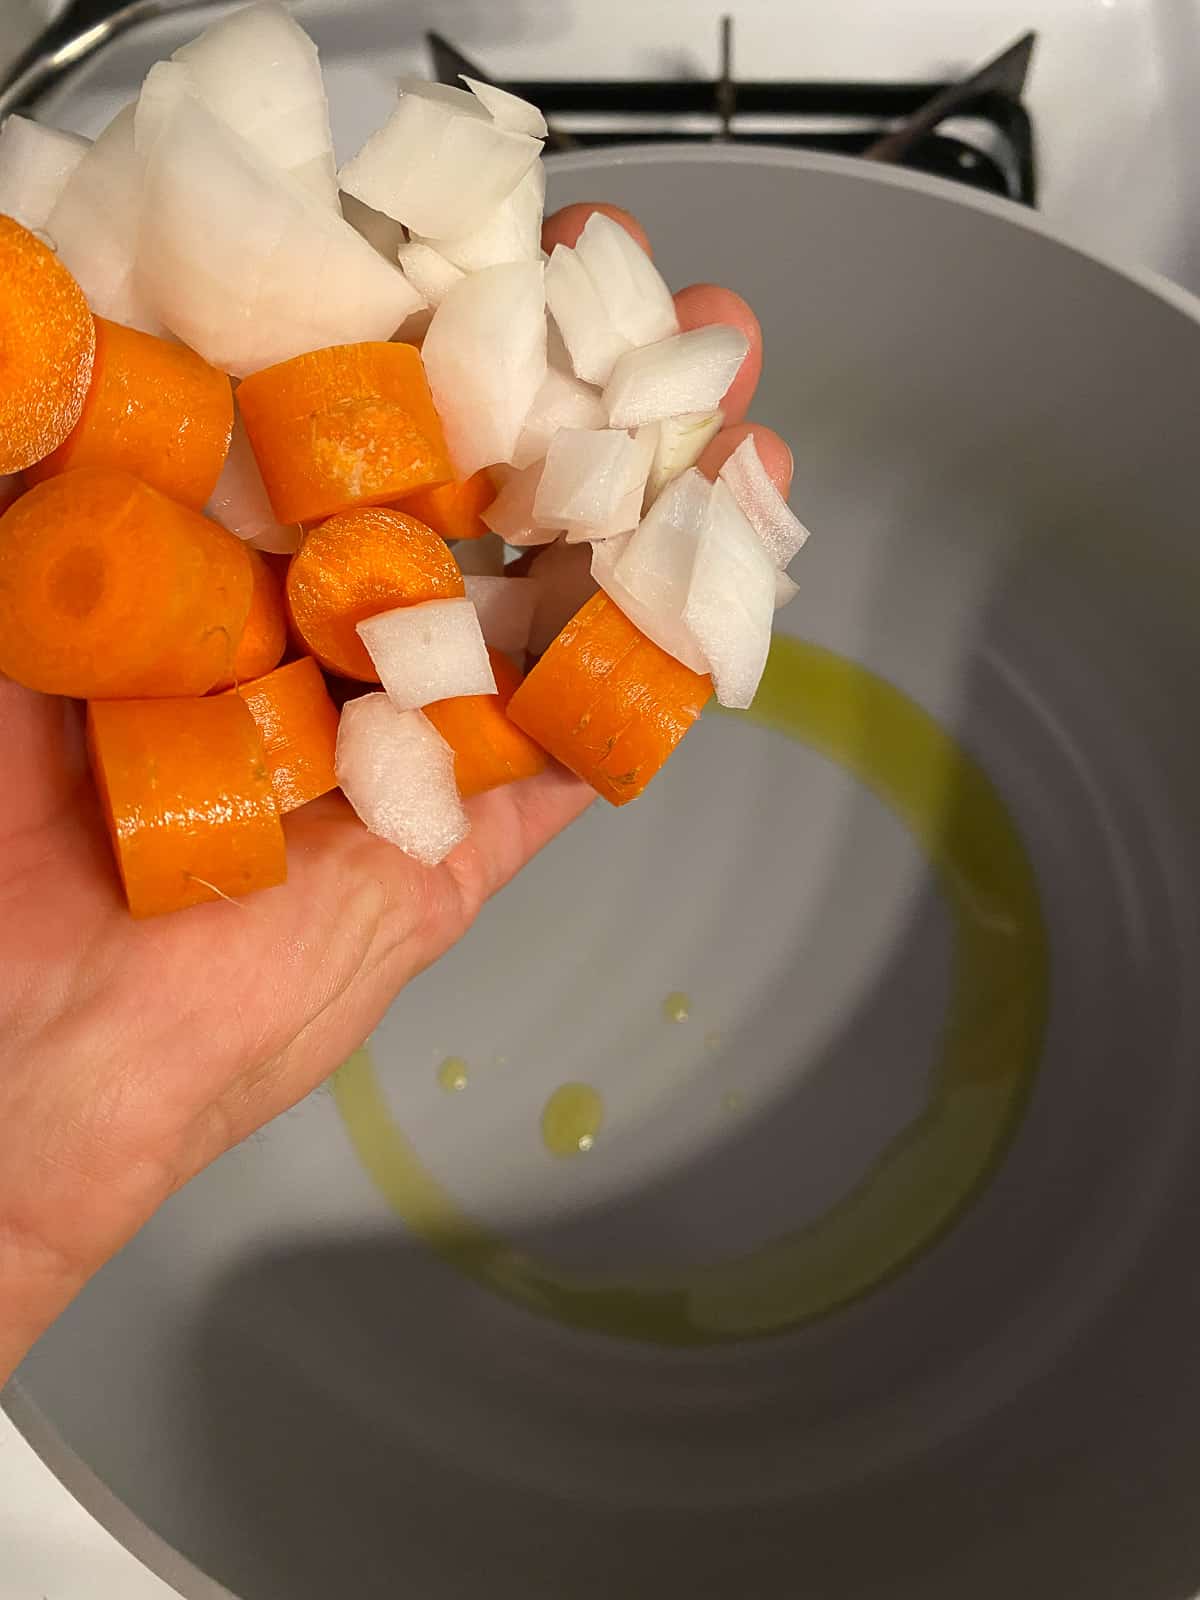 process of adding carrots and onions into a pan